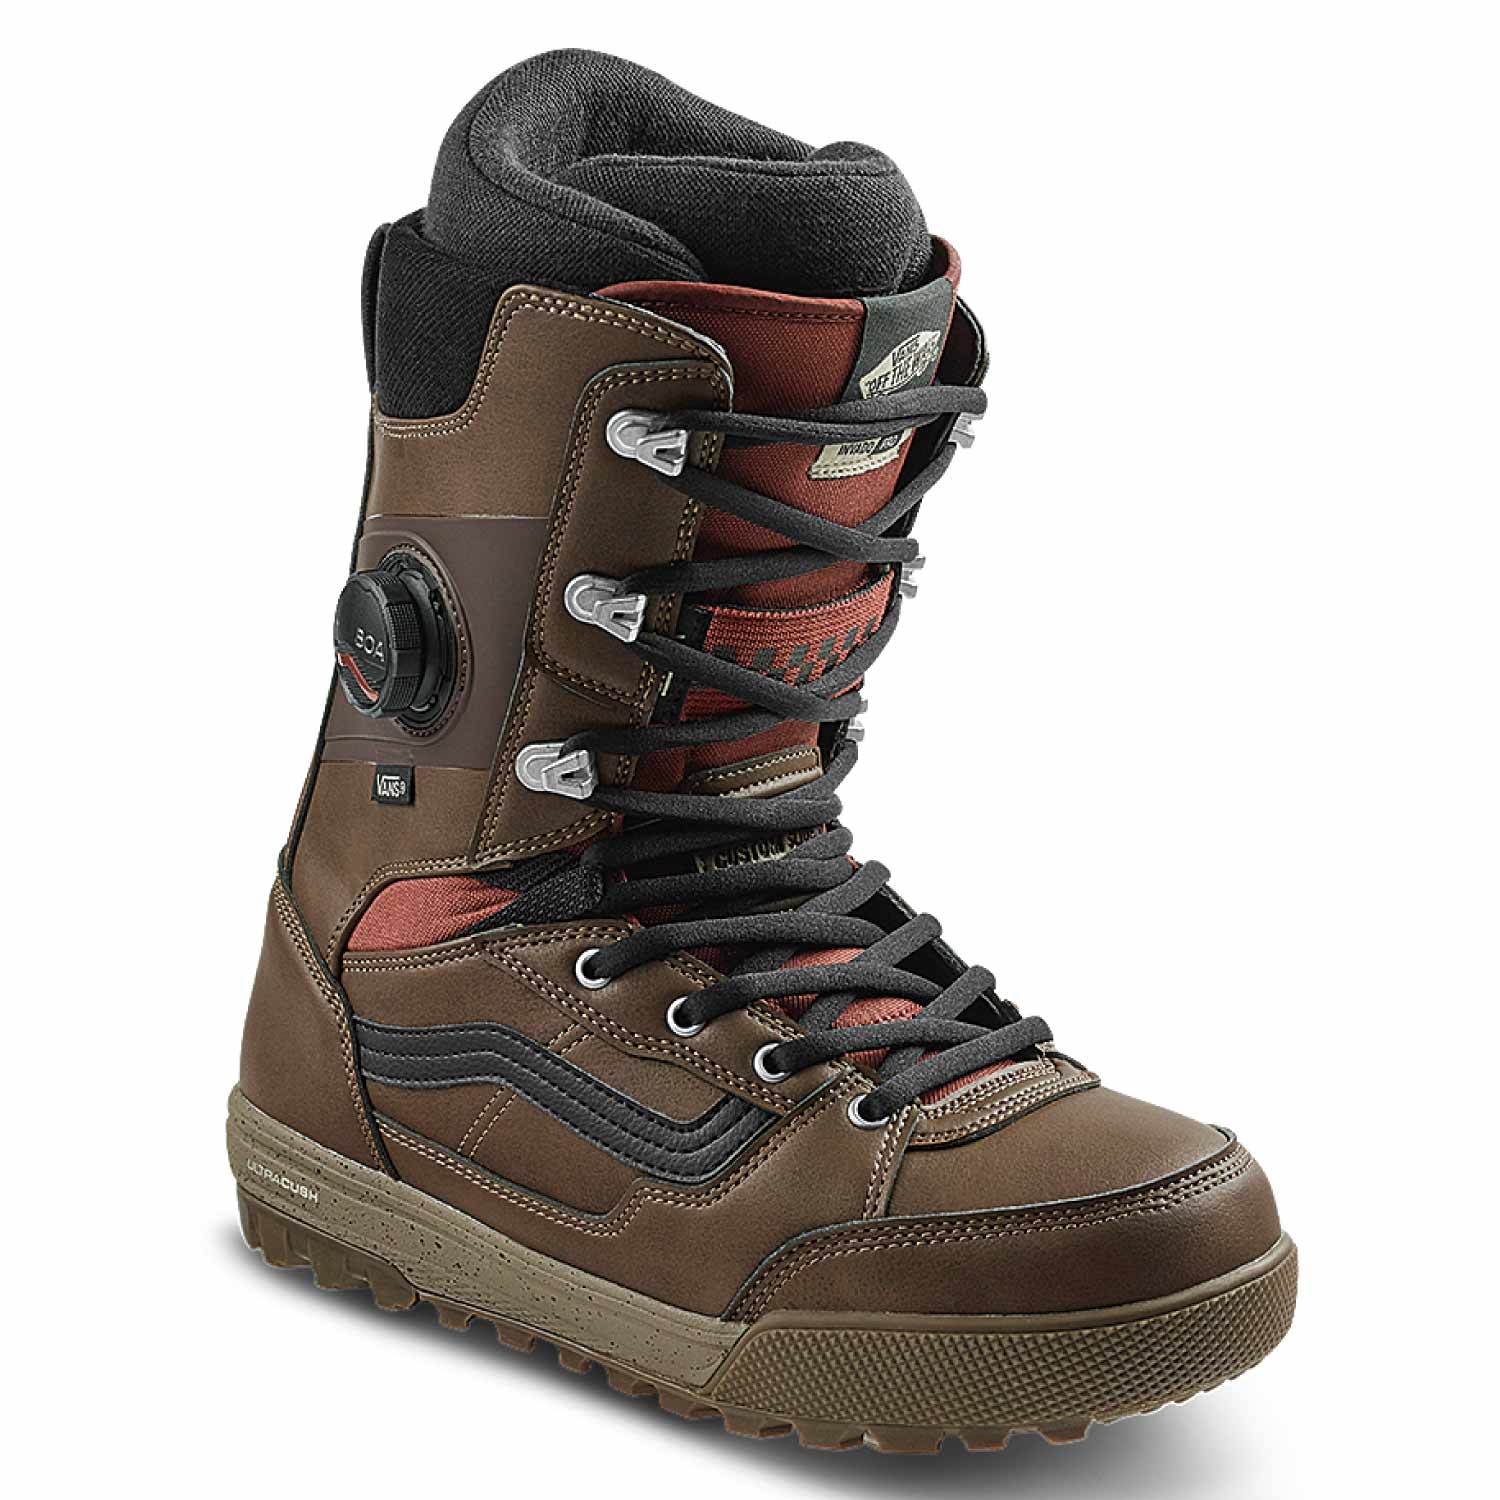 Vans Invado Pro Snowboard Boots Brown/Red 2021